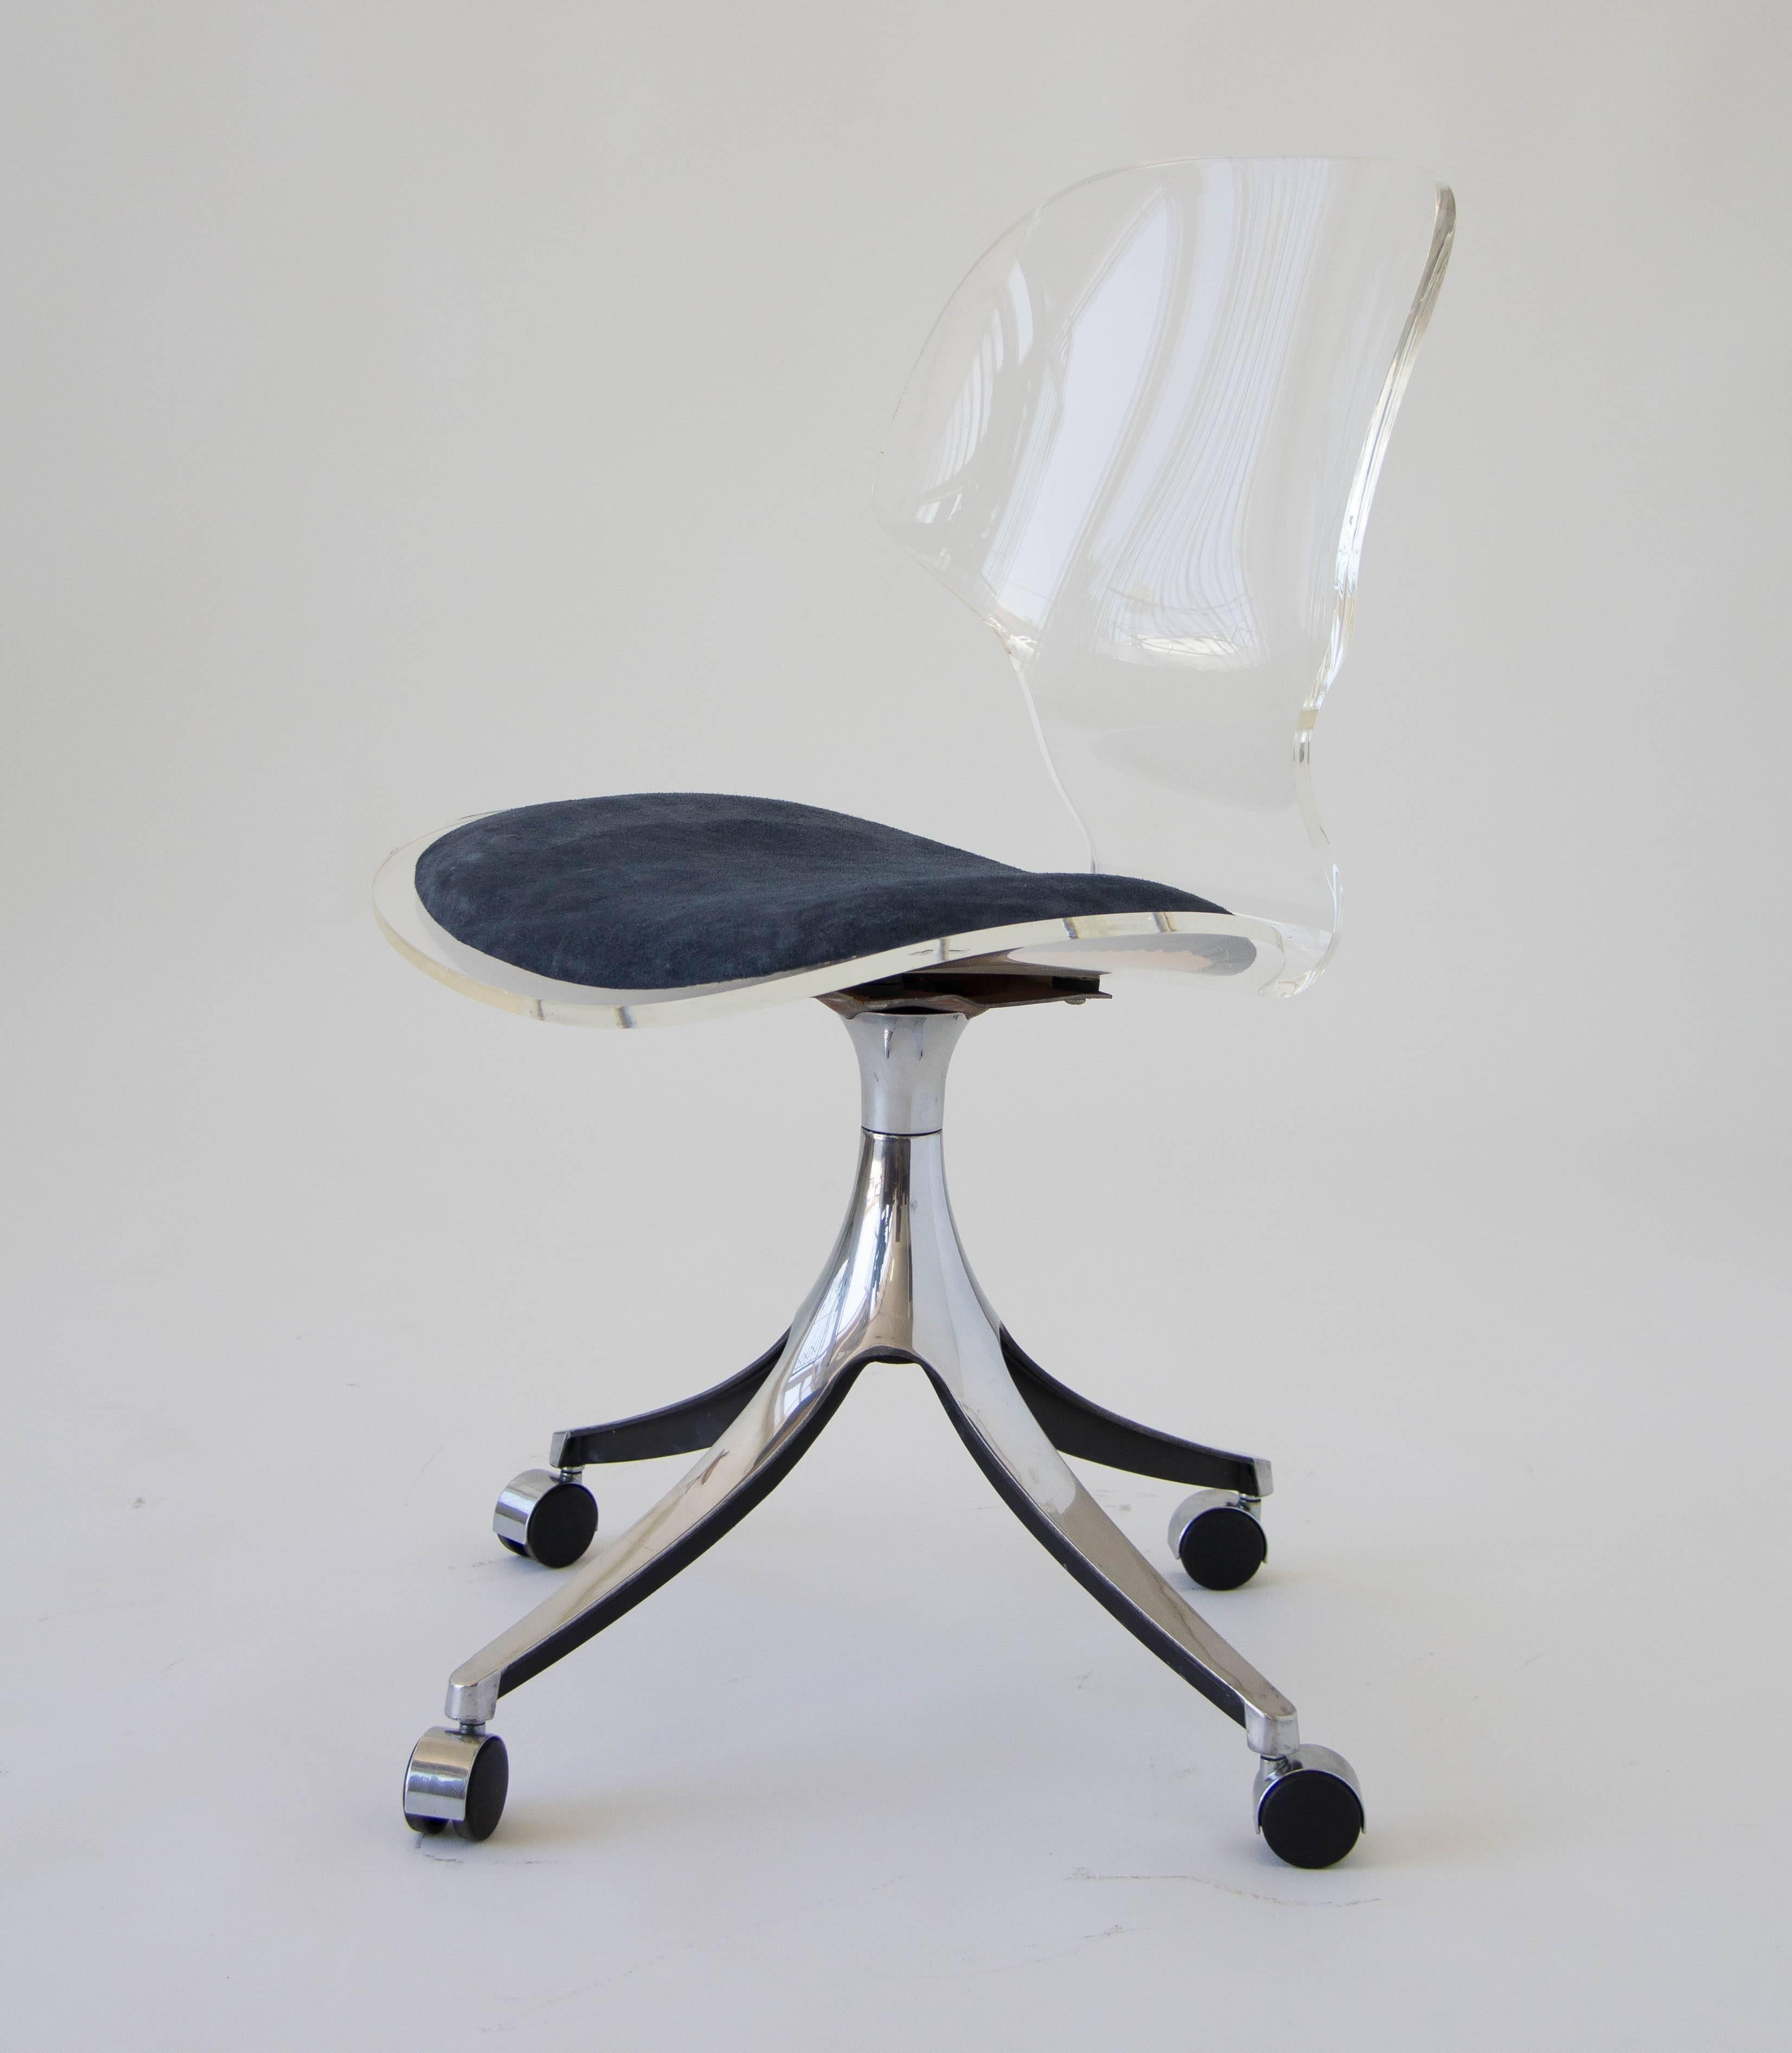 hill manufacturing lucite chairs